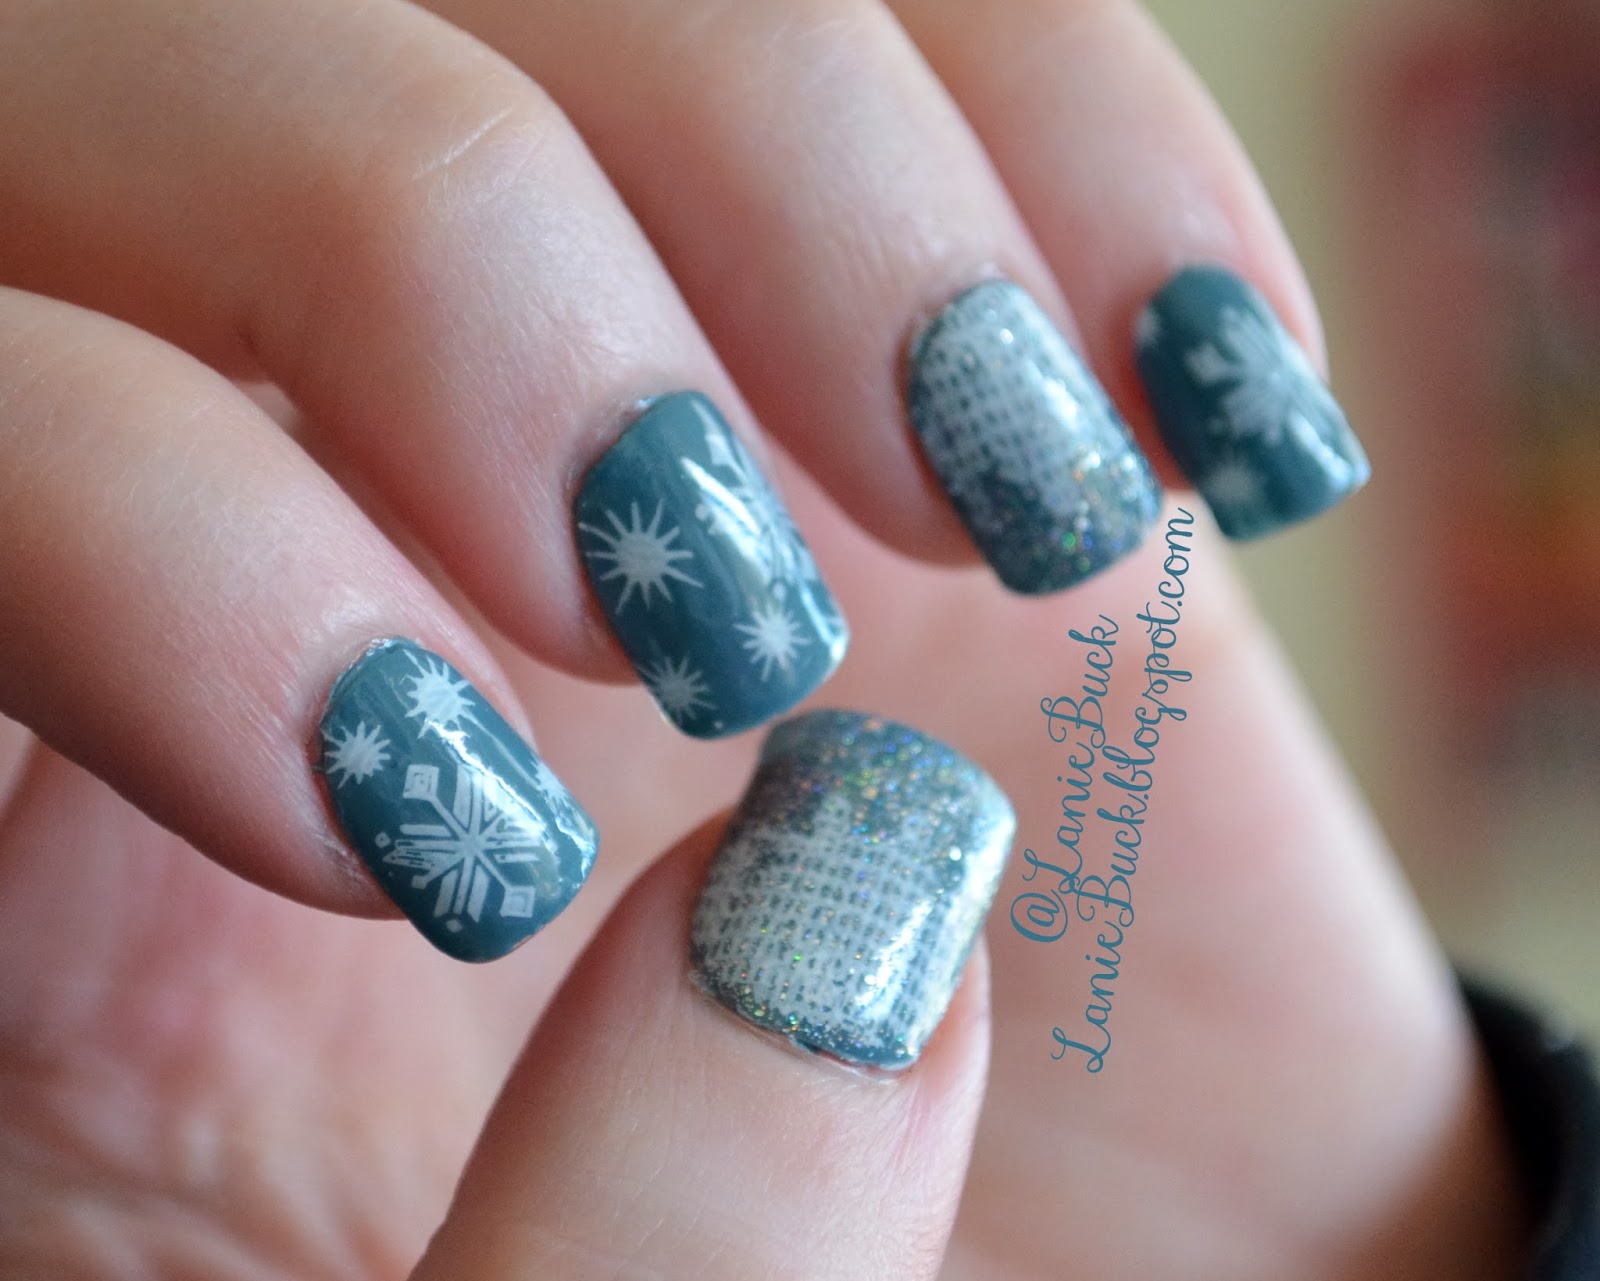 5. How to Create Snowflake Nails - wide 2